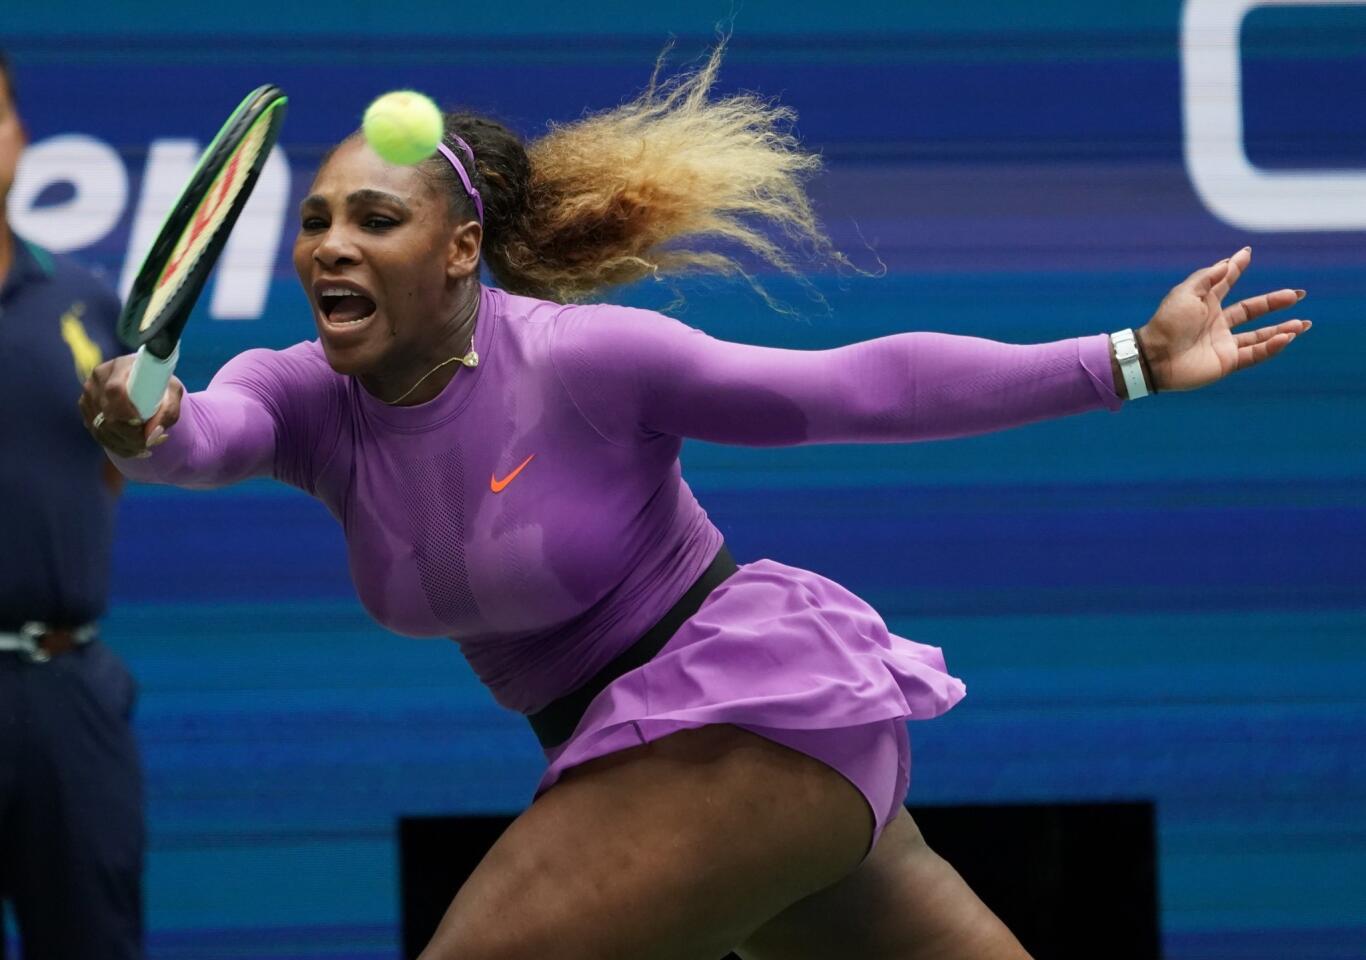 Serena Williams returns a shot during her Women's Singles final match against Bianca Andreescu inside the Billie Jean King National Tennis Center on Sept. 7, 2019, in Queens.